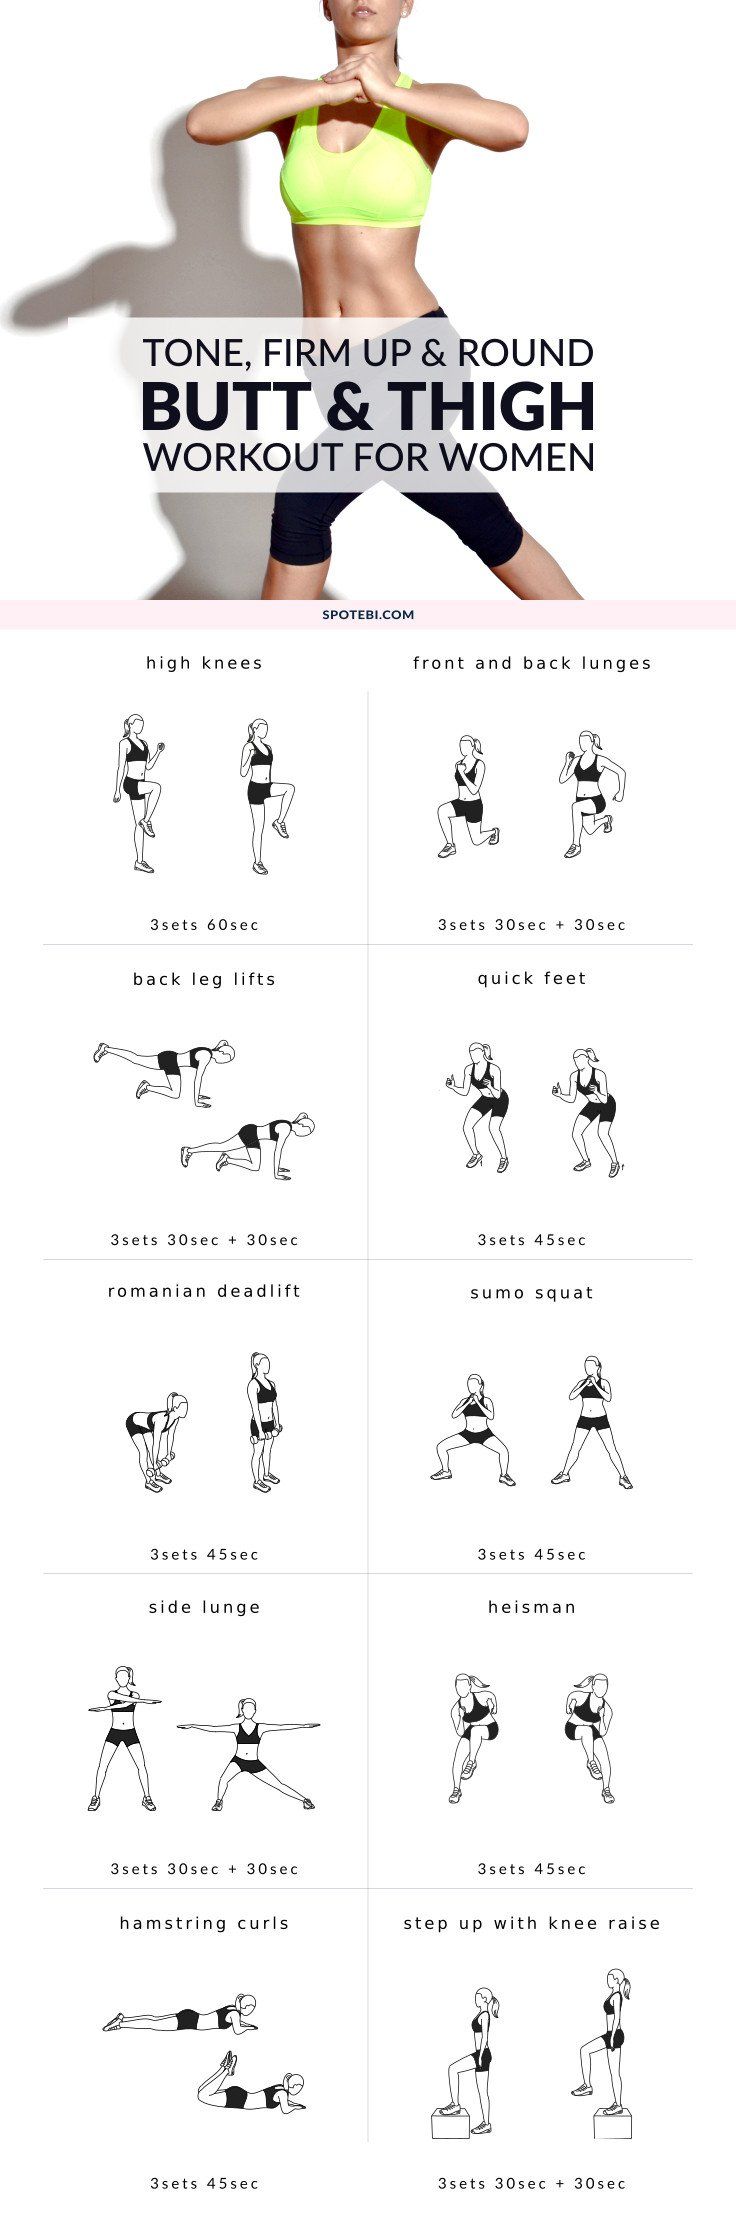 Exercises for butt and legs